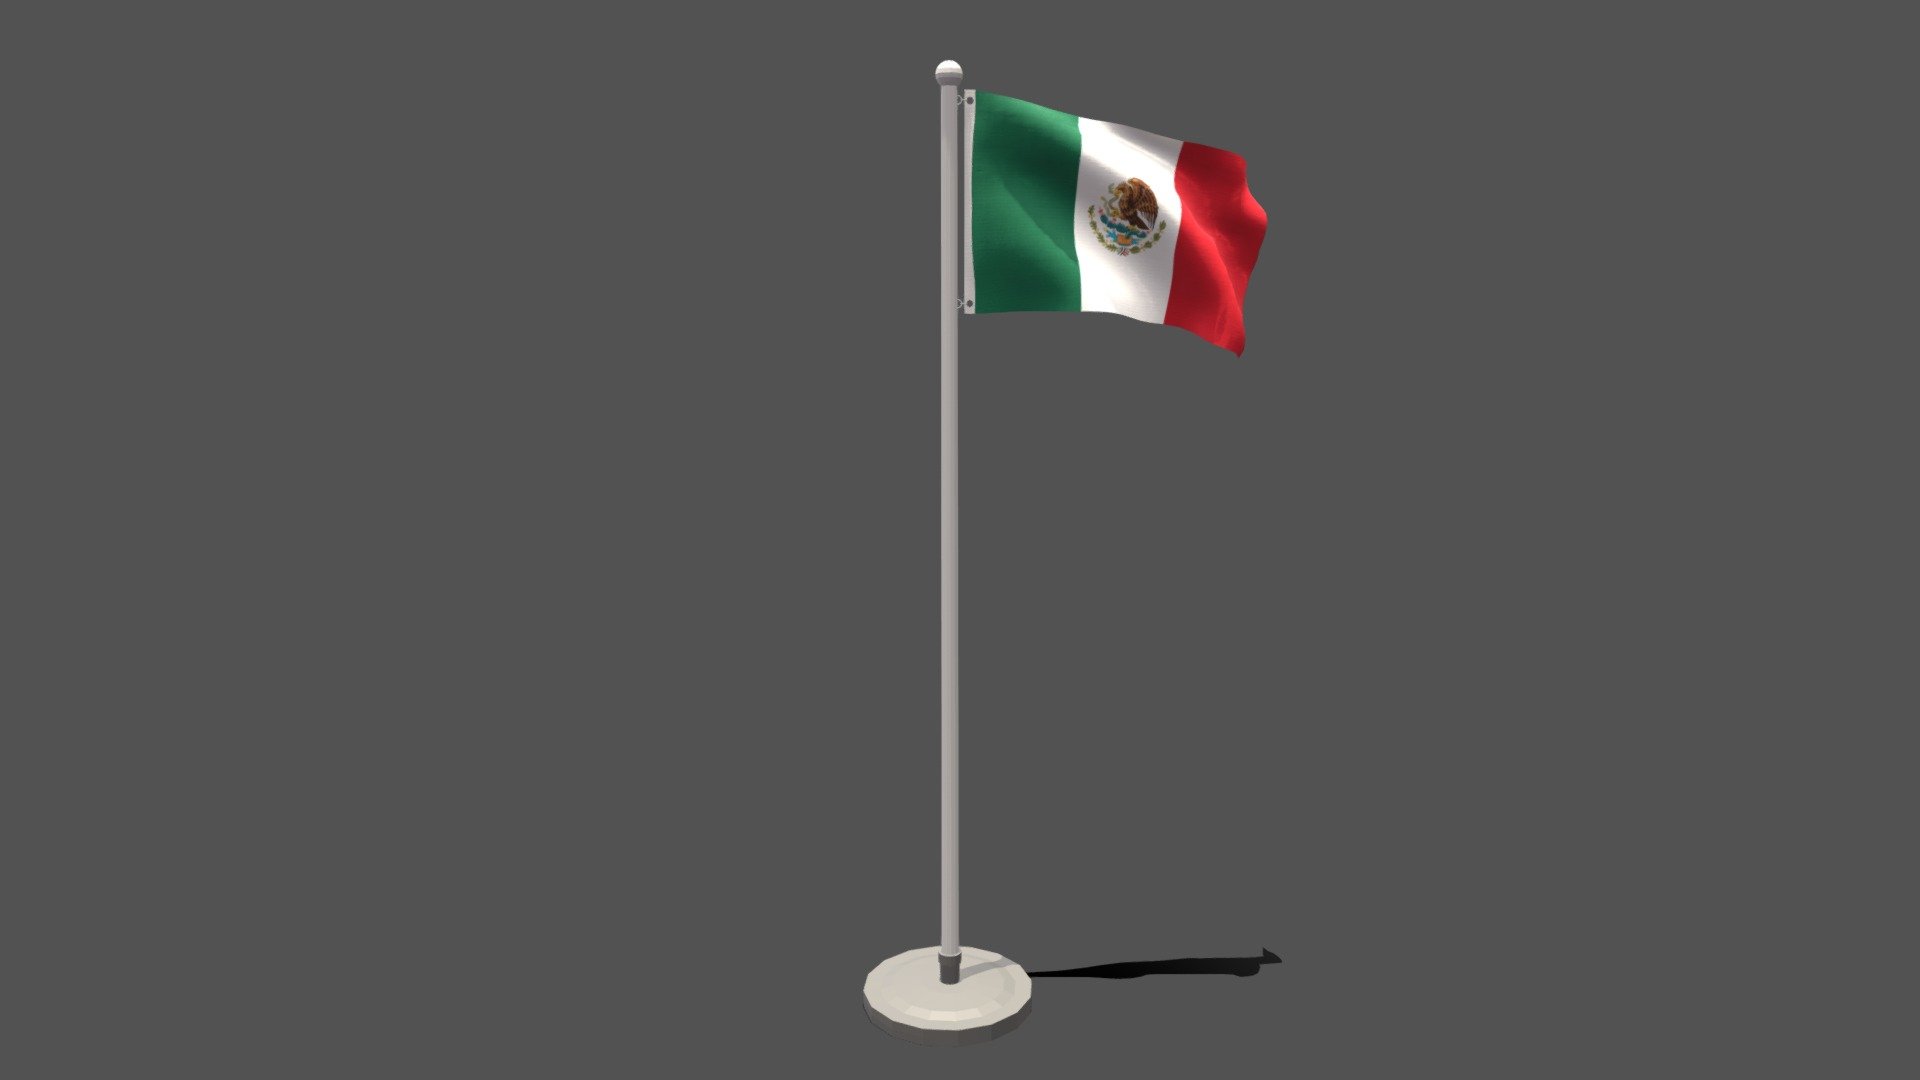 This is a low poly 3D model of an animated flag of Mexico. The low poly flag was modeled and prepared for low-poly style renderings, background, general CG visualization presented as 2 meshes with quads only.

Verts : 1.536 Faces : 1.459.

1024x1024 textures included. Diffuse, roughness and normal maps available only for flag. The pole have simple materials with colors.

The animation is based on shapekeys, 248 frames and seamless, no rig included.

The original file was created in blender. You will receive a OBJ, FBX, blend, DAE, Stl, gLTF, abc.

PLEASE NOTE Animation icluded only in blend, abc and glTF files.

Warning: Depending on which software package you are using, the exchange formats (.obj , .dae, .fbx) may not match the preview images exactly. Due to the nature of these formats, there may be some textures that have to be loaded by hand and possibly triangulated geometry 3d model